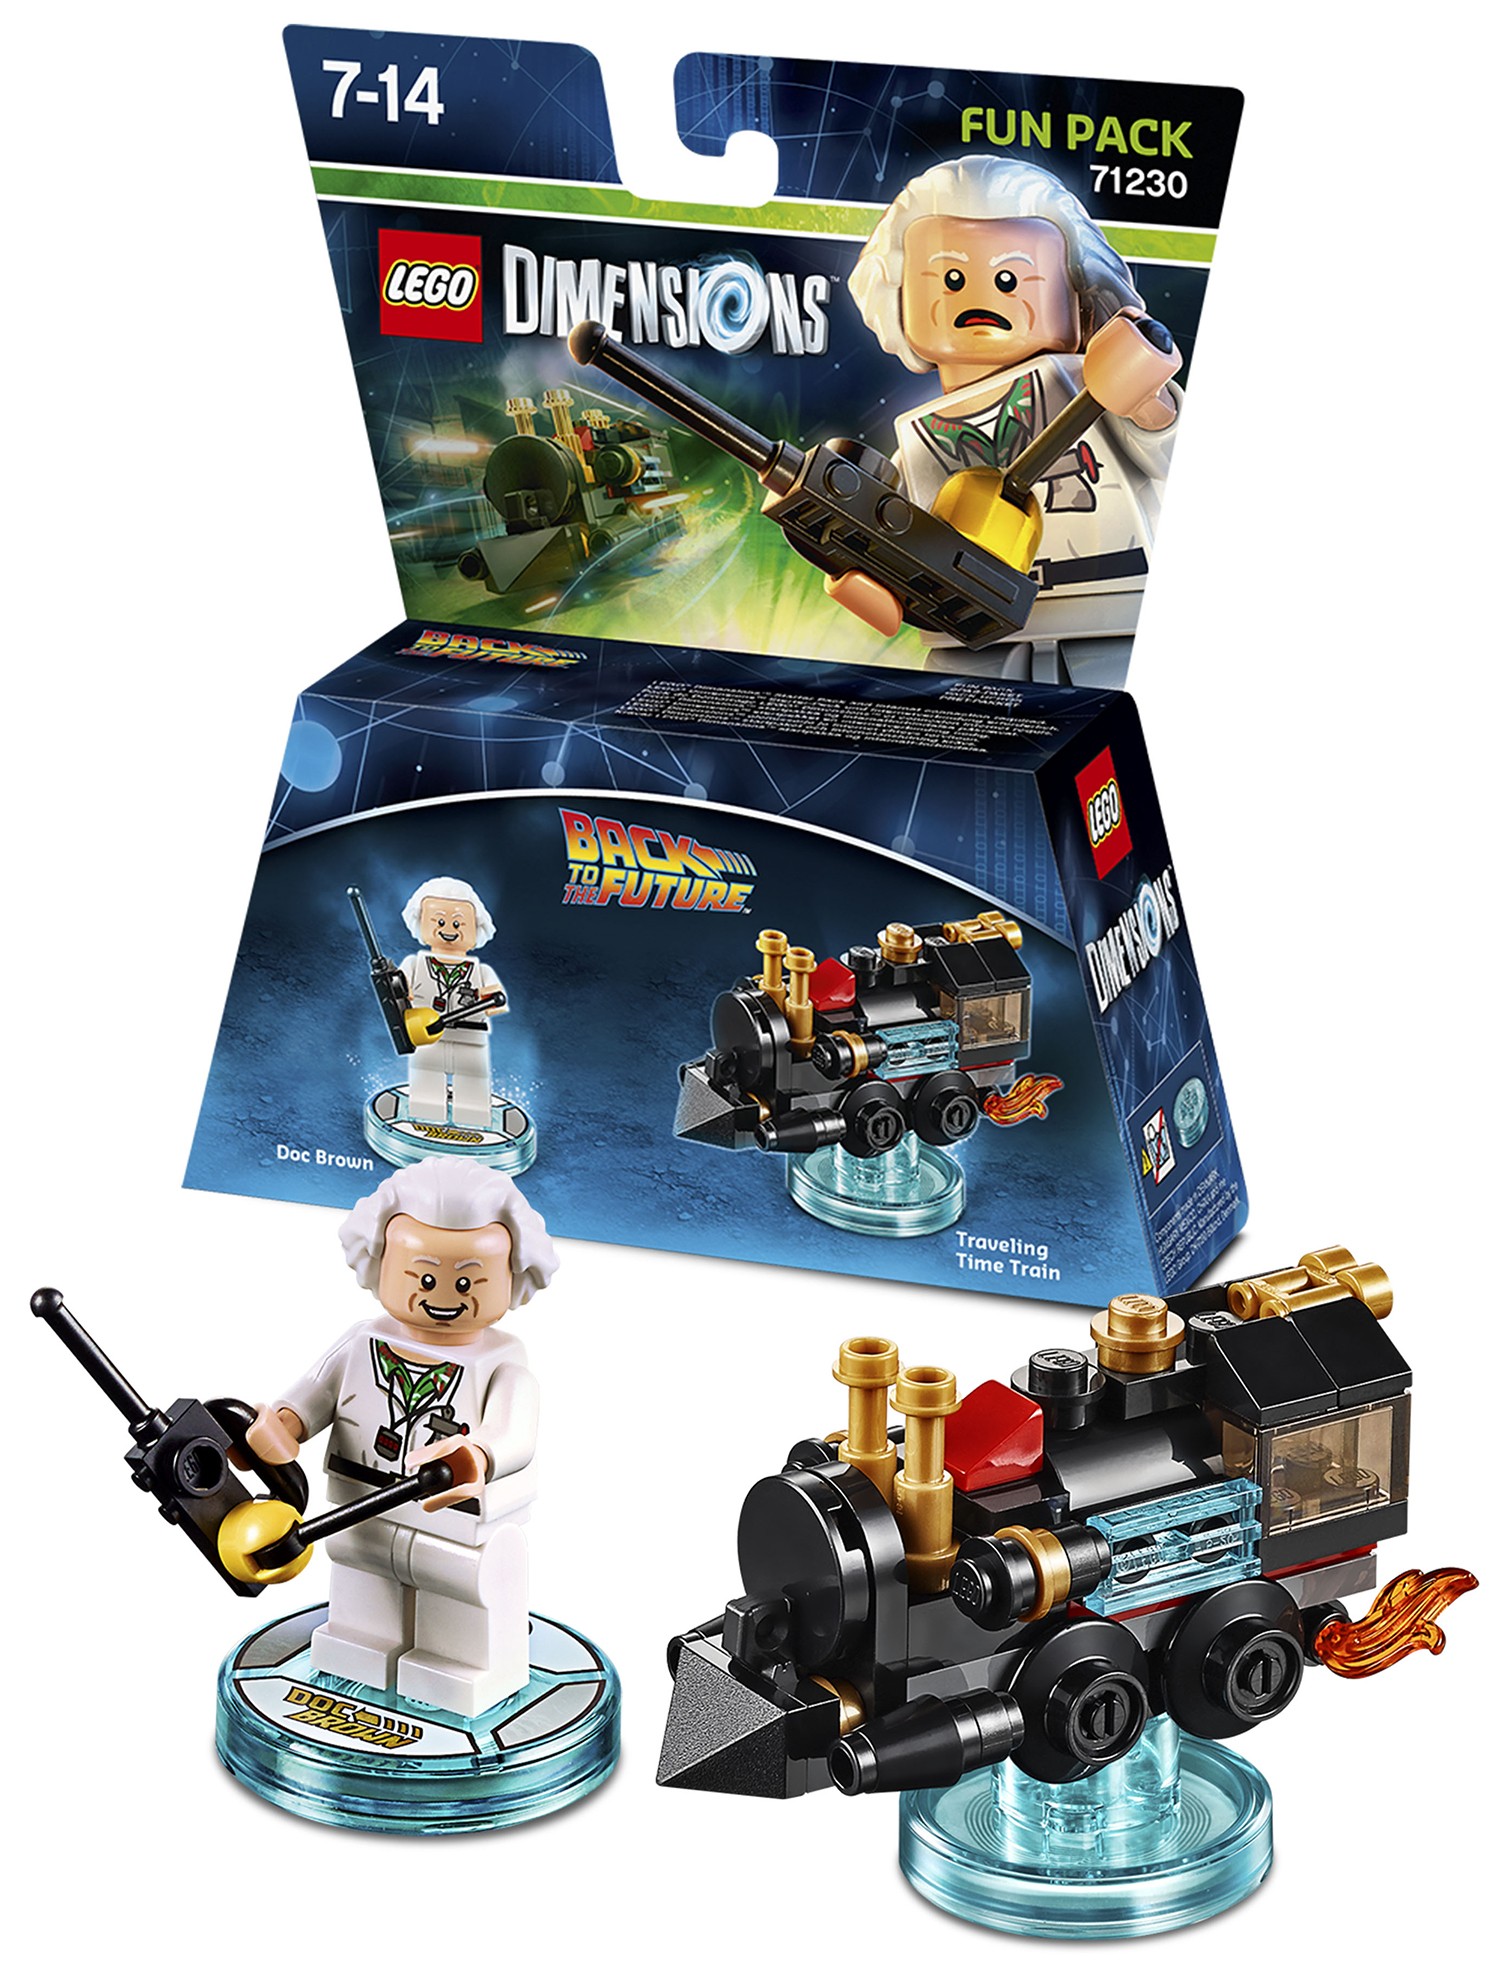 Get a Better Look at Some of the Upcoming Lego Dimensions Fun Packs